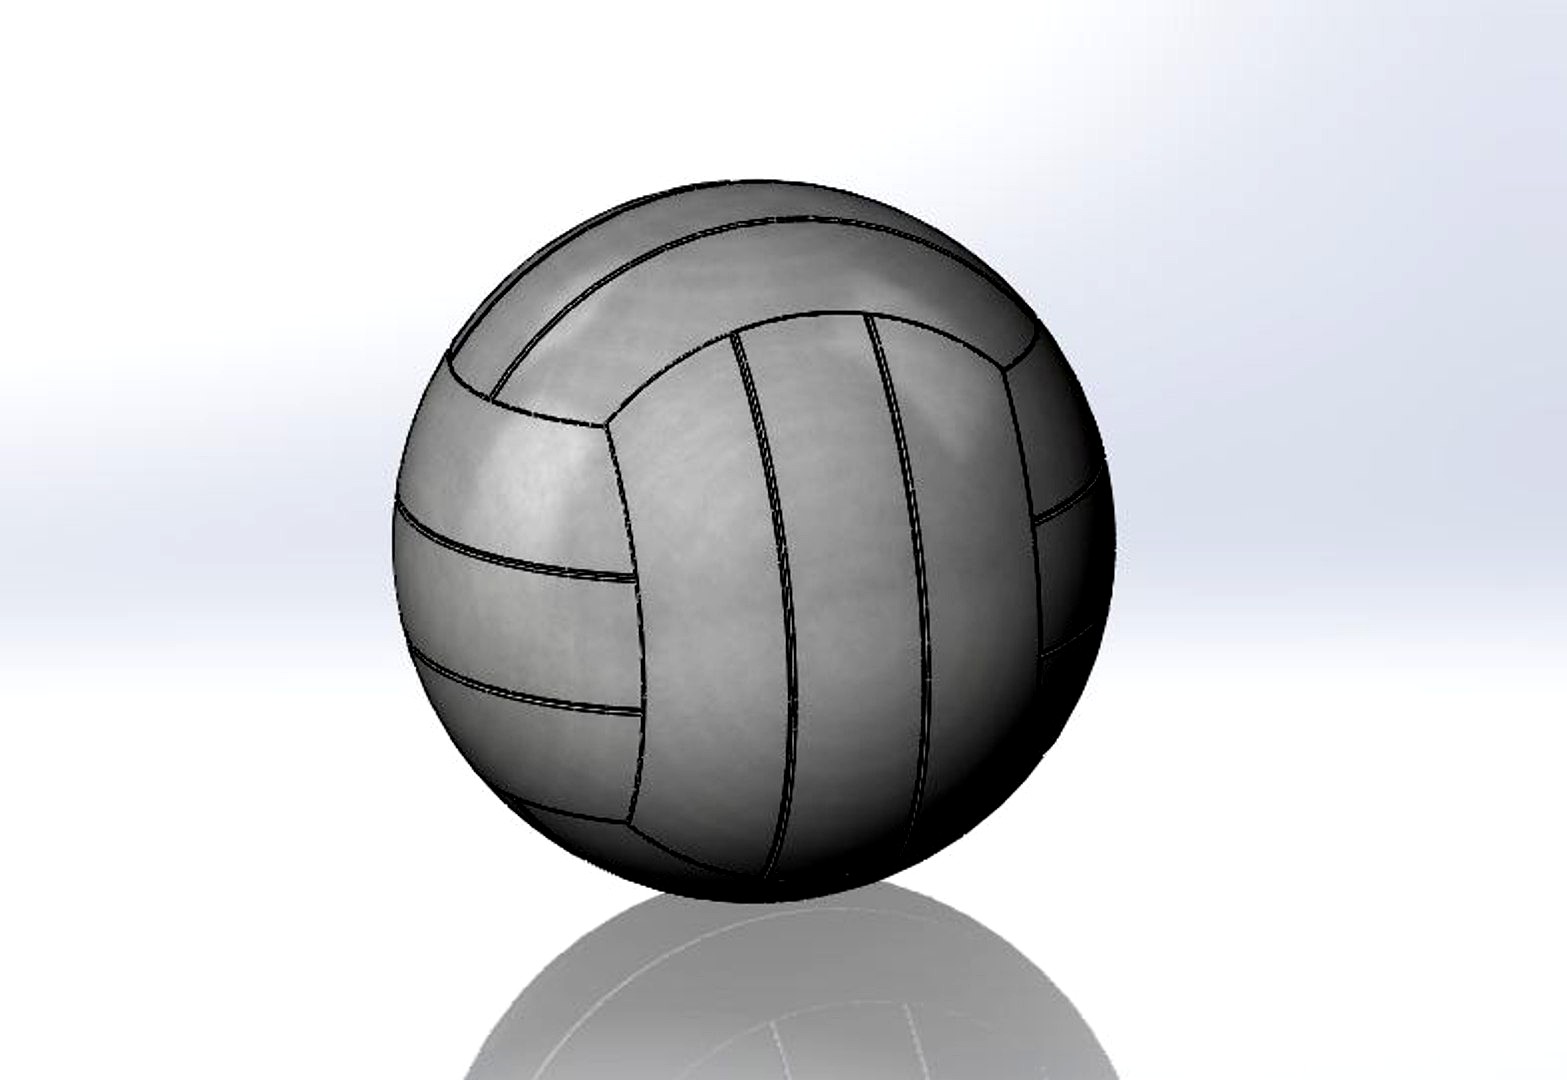 Volley ball- Part